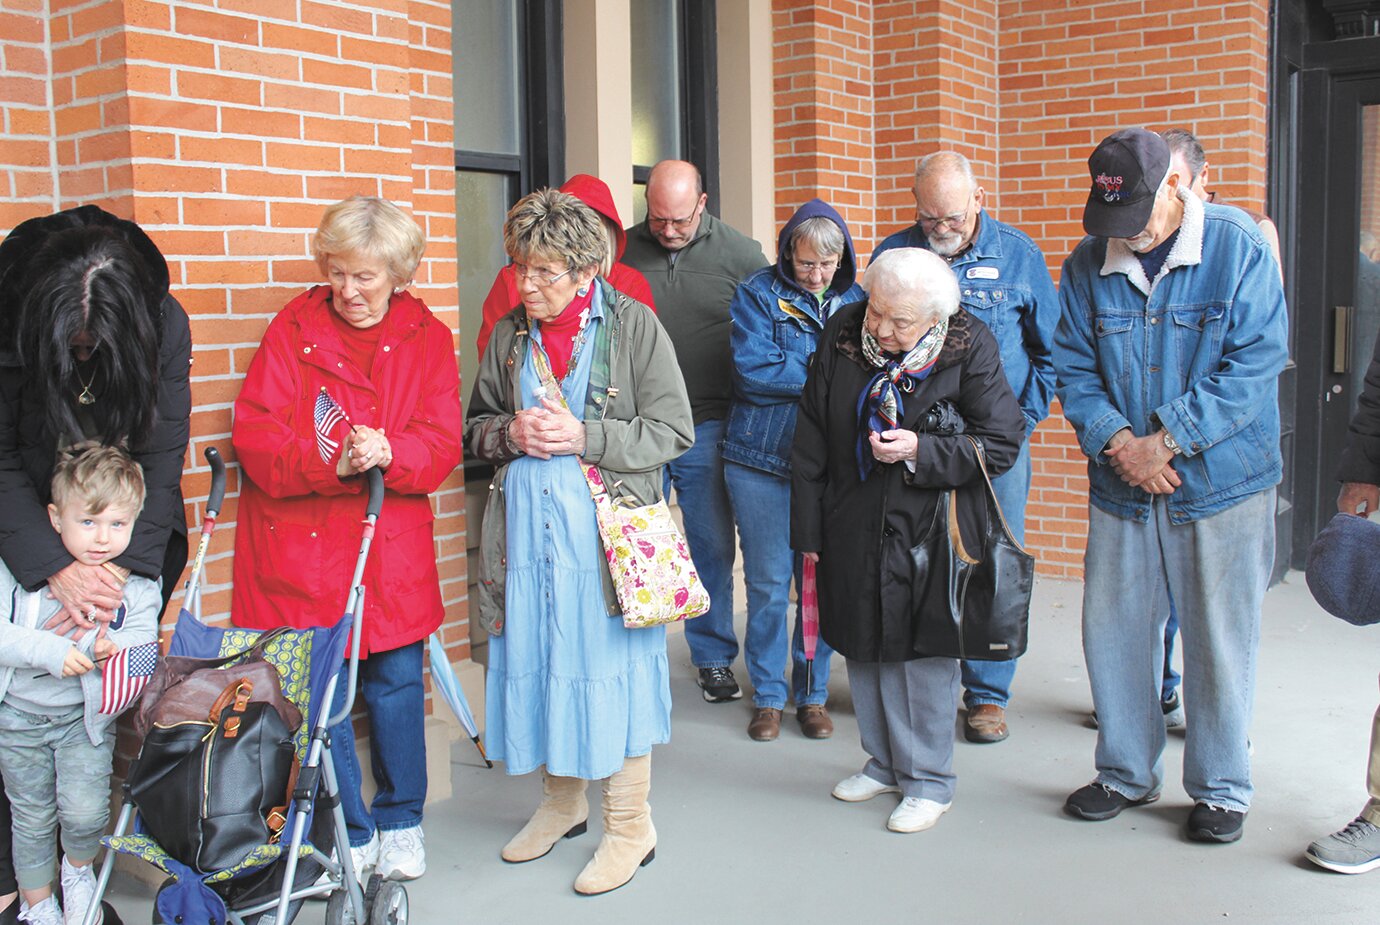 A group of devoted Christians bow their heads during one of the many prayers spoken aloud on the courthouse patio during the 2022 National Day of Prayer.